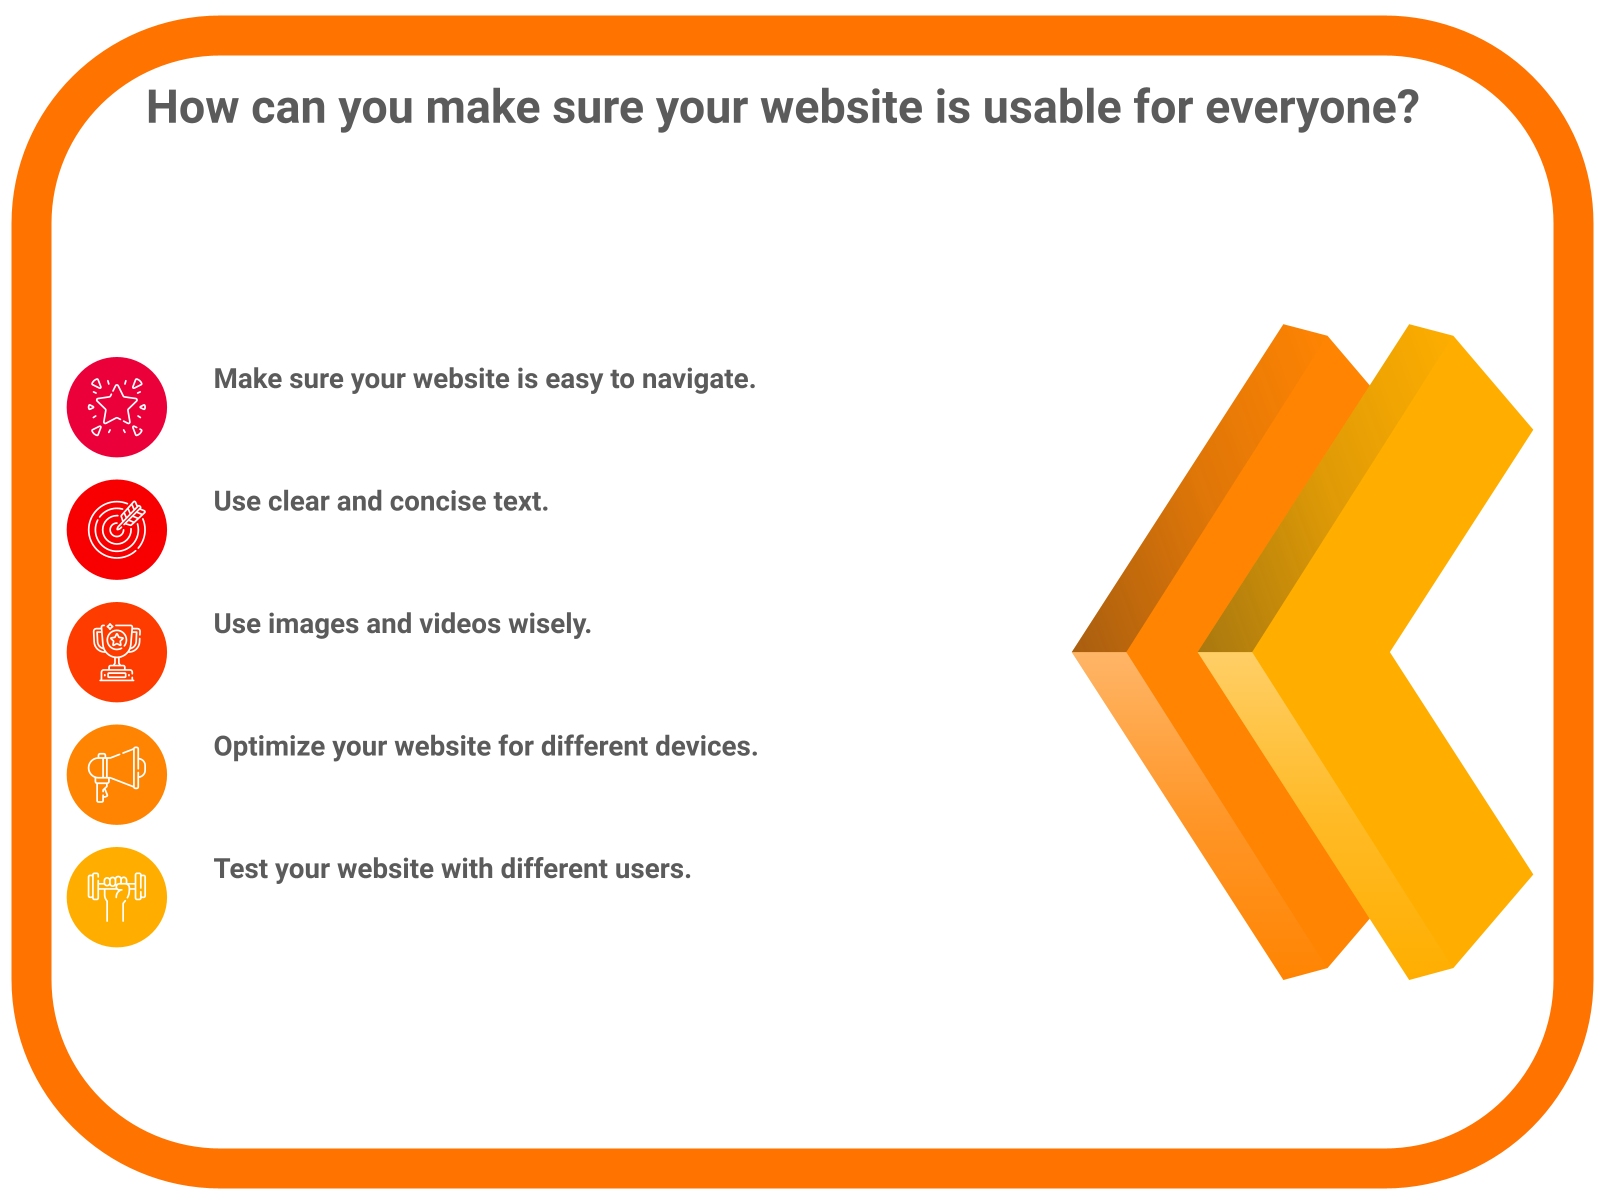 How can you make sure your website is usable for everyone?